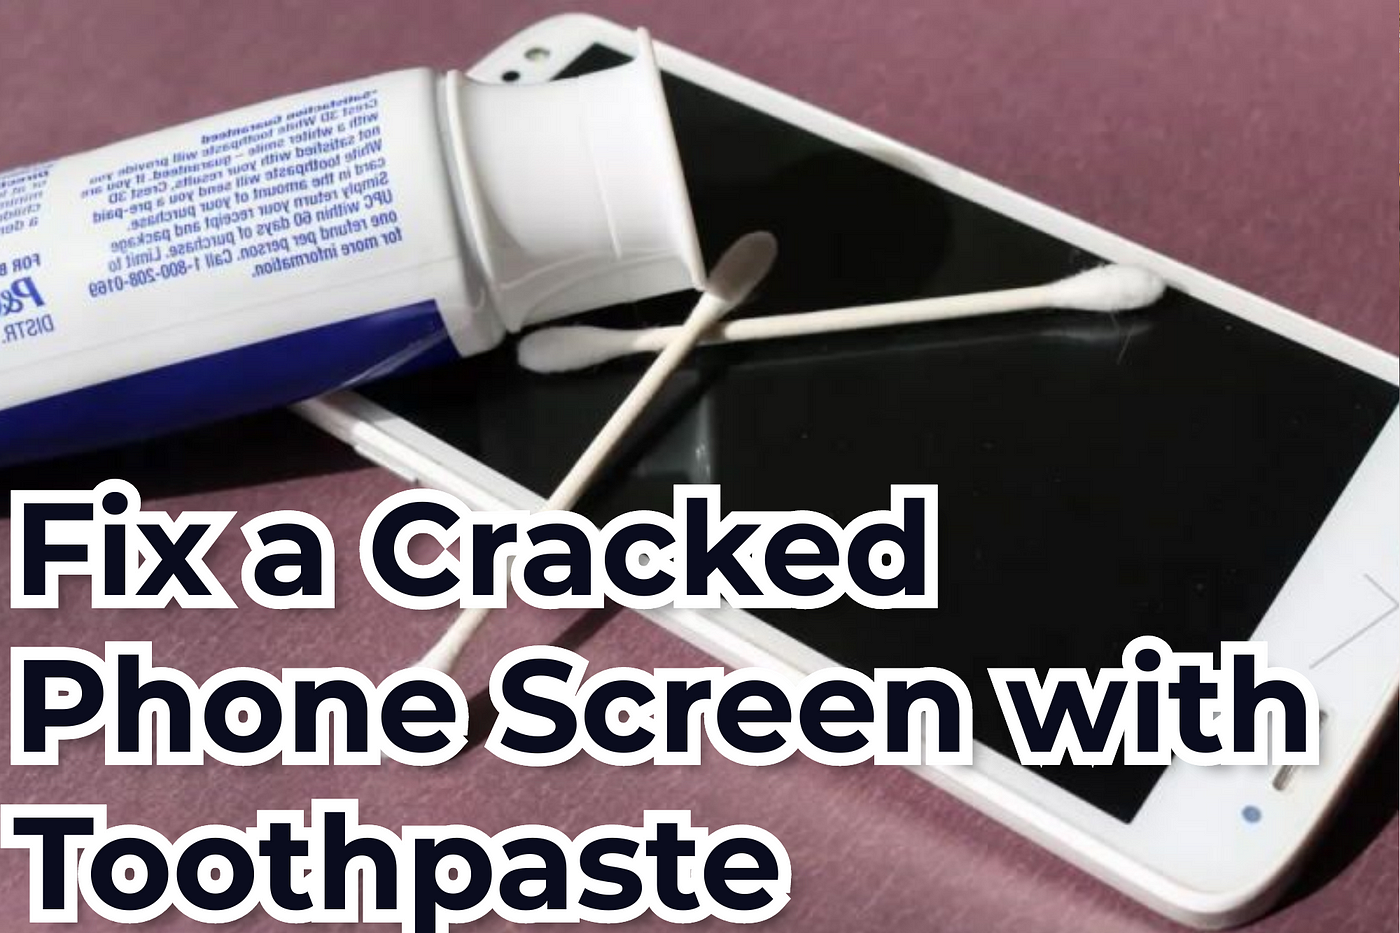 How to remove scratches from iPhone screen